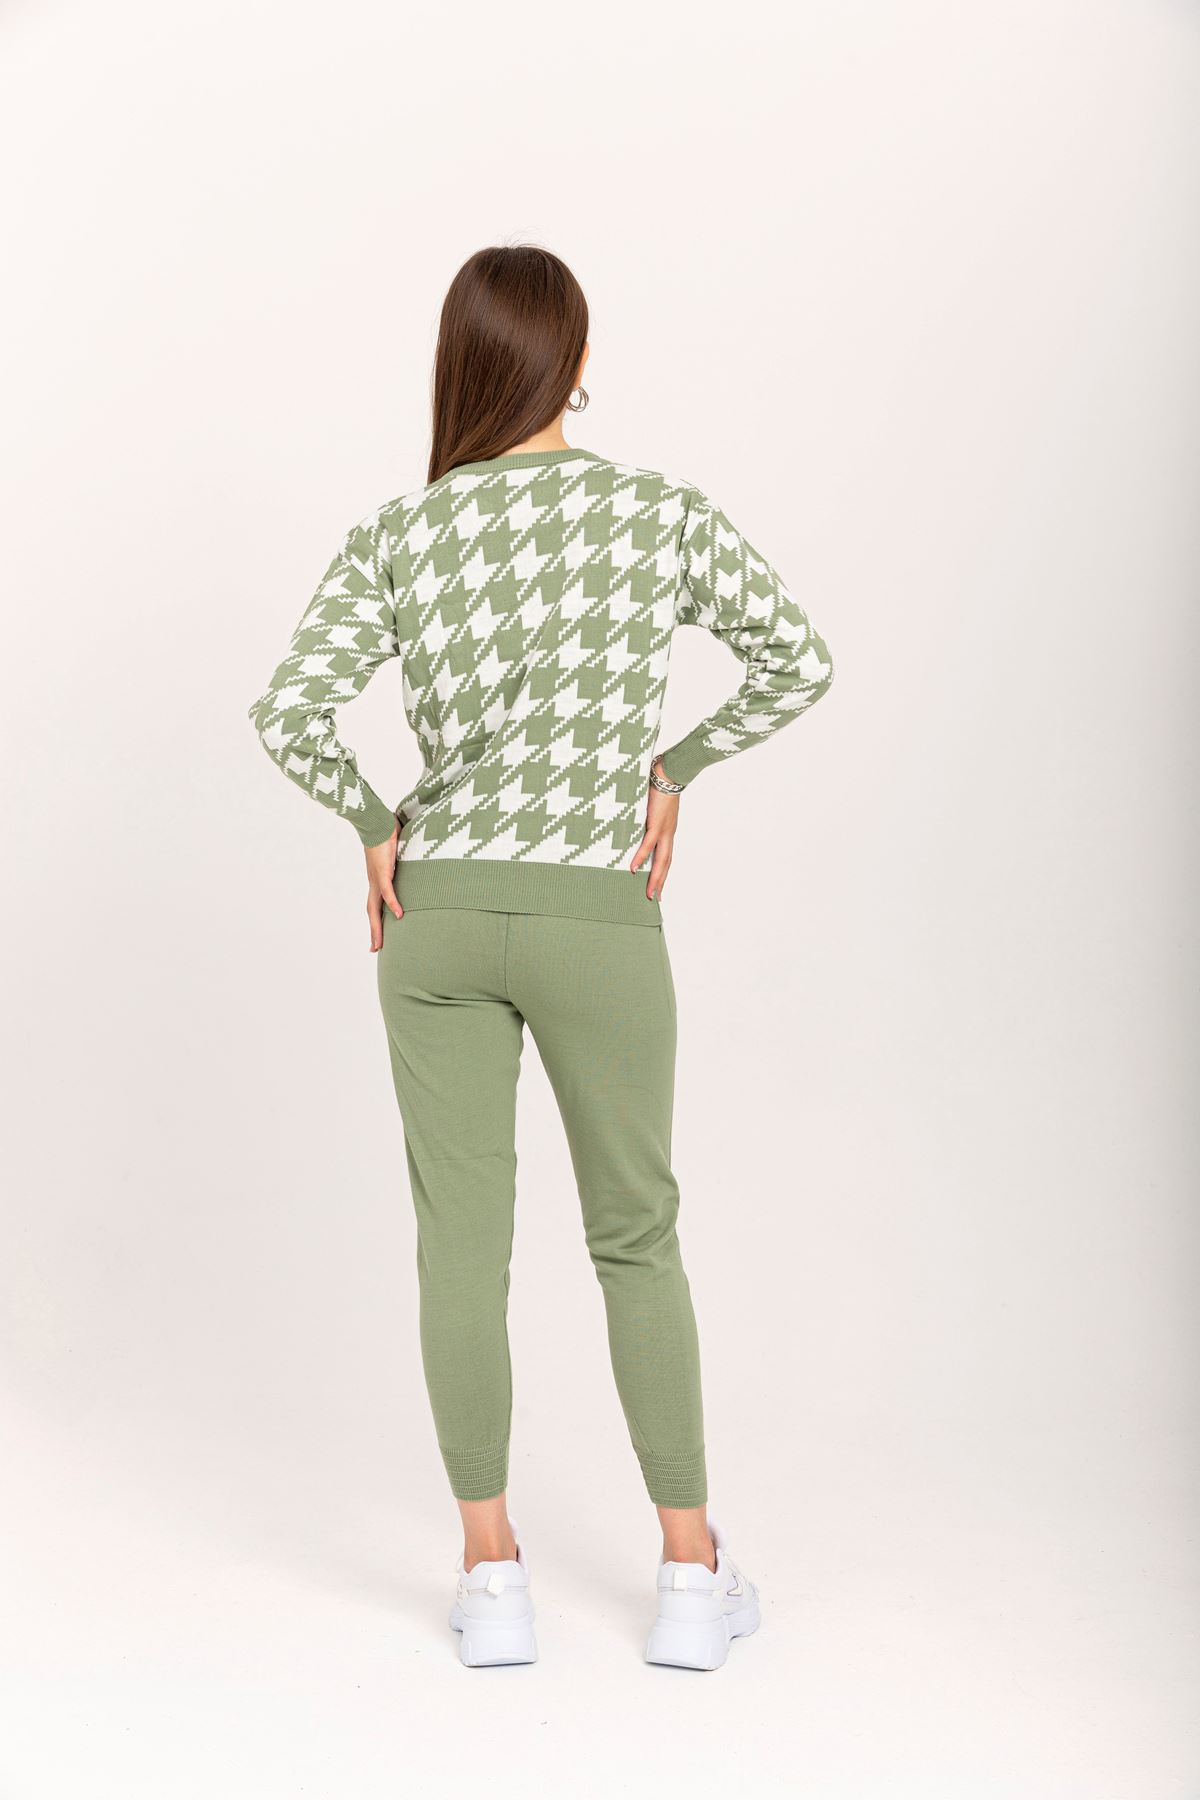 Knitwear Fabric Long Sleeve Bicycle Collar Houndstooth Women'S Set